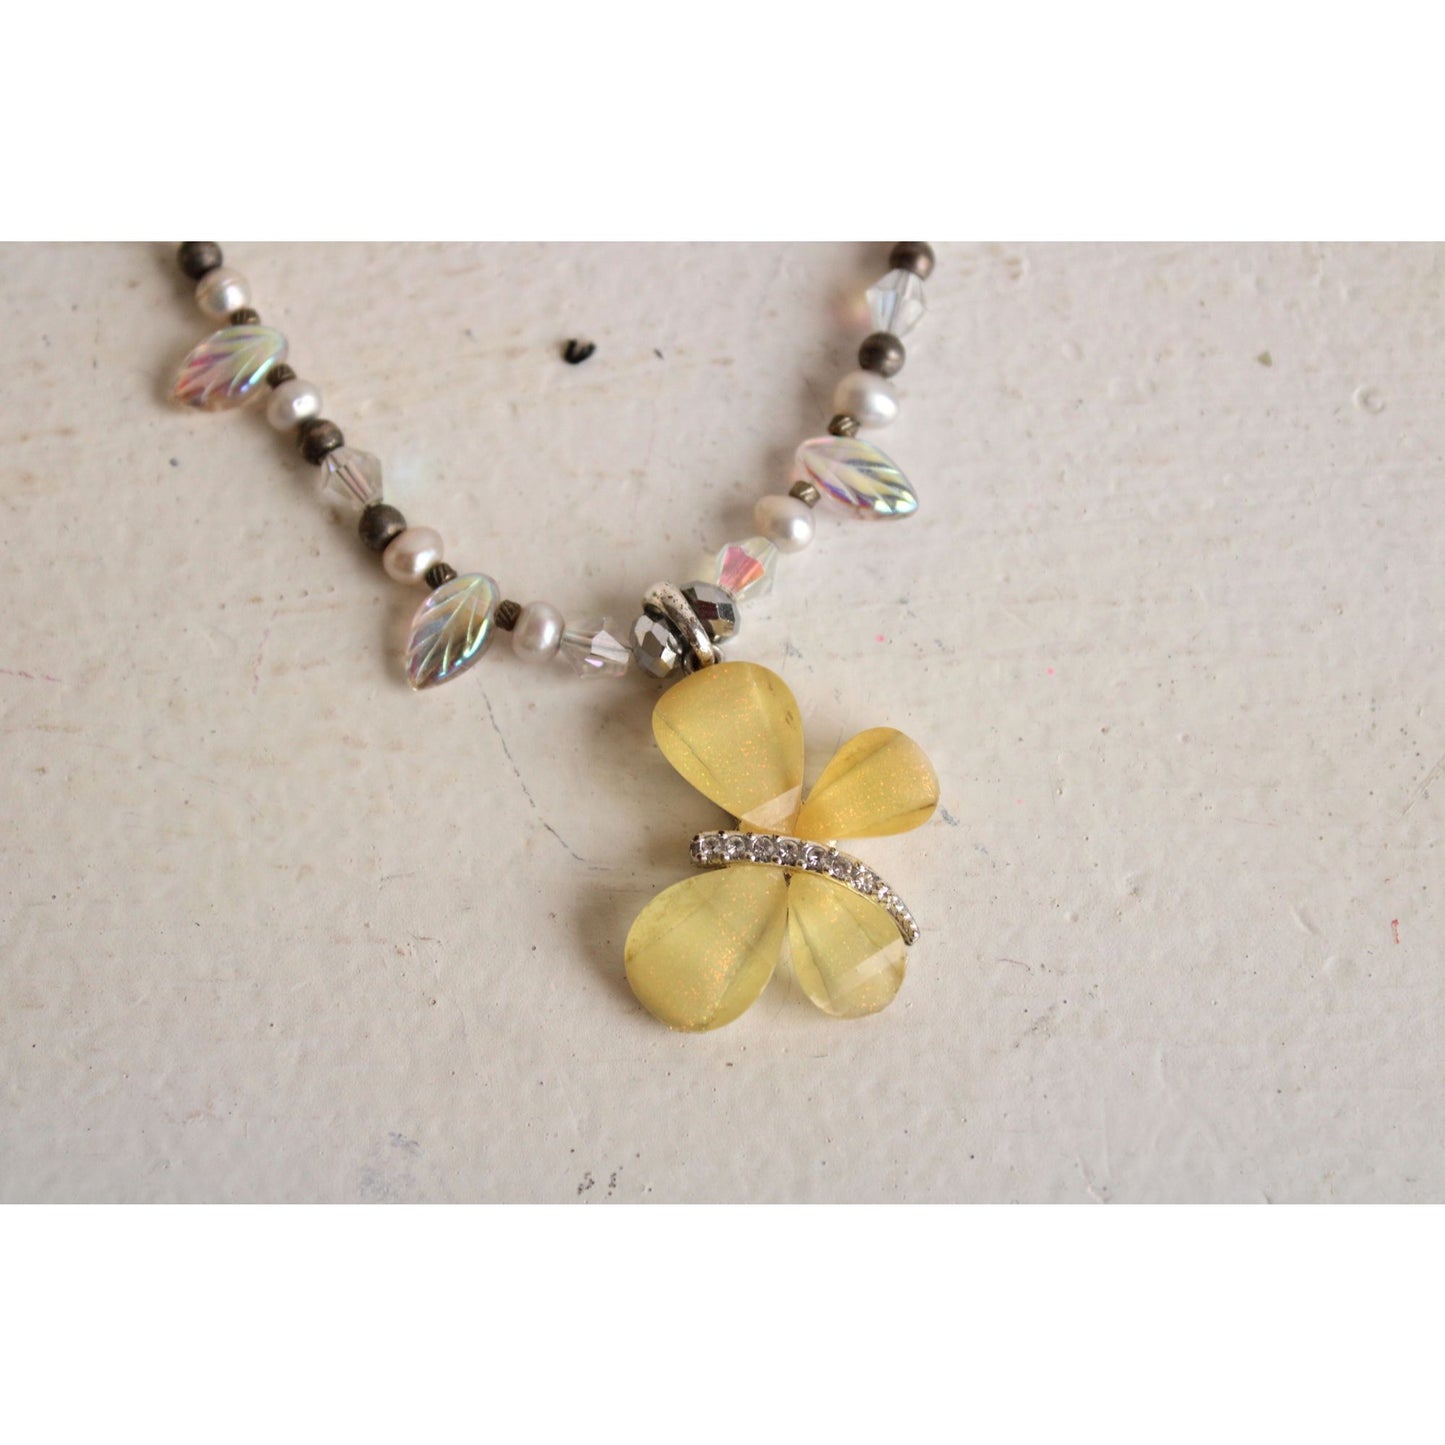 Butterfly Beaded Necklace, Toggle Clasp, Handmade